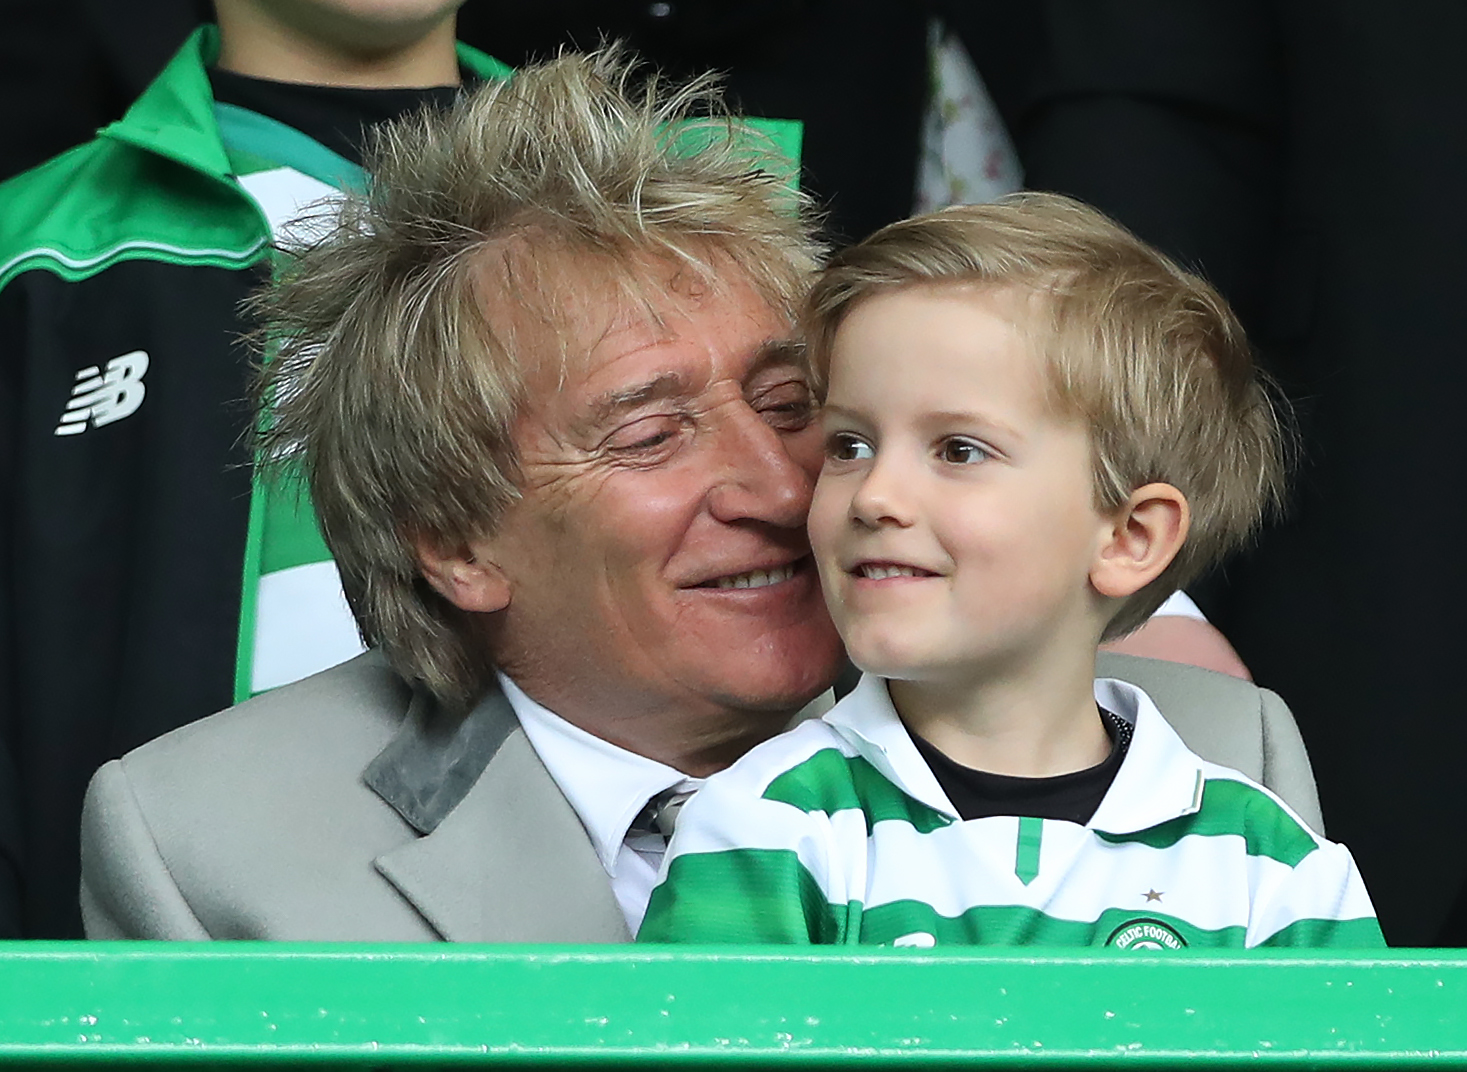 Rod Stewart and son Aiden Stewart are seen during the Ladbrokes Scottish Premiership match between Celtic and Rangers at Celtic Park on March 12, 2017 in Glasgow, Scotland | Source: Getty Images